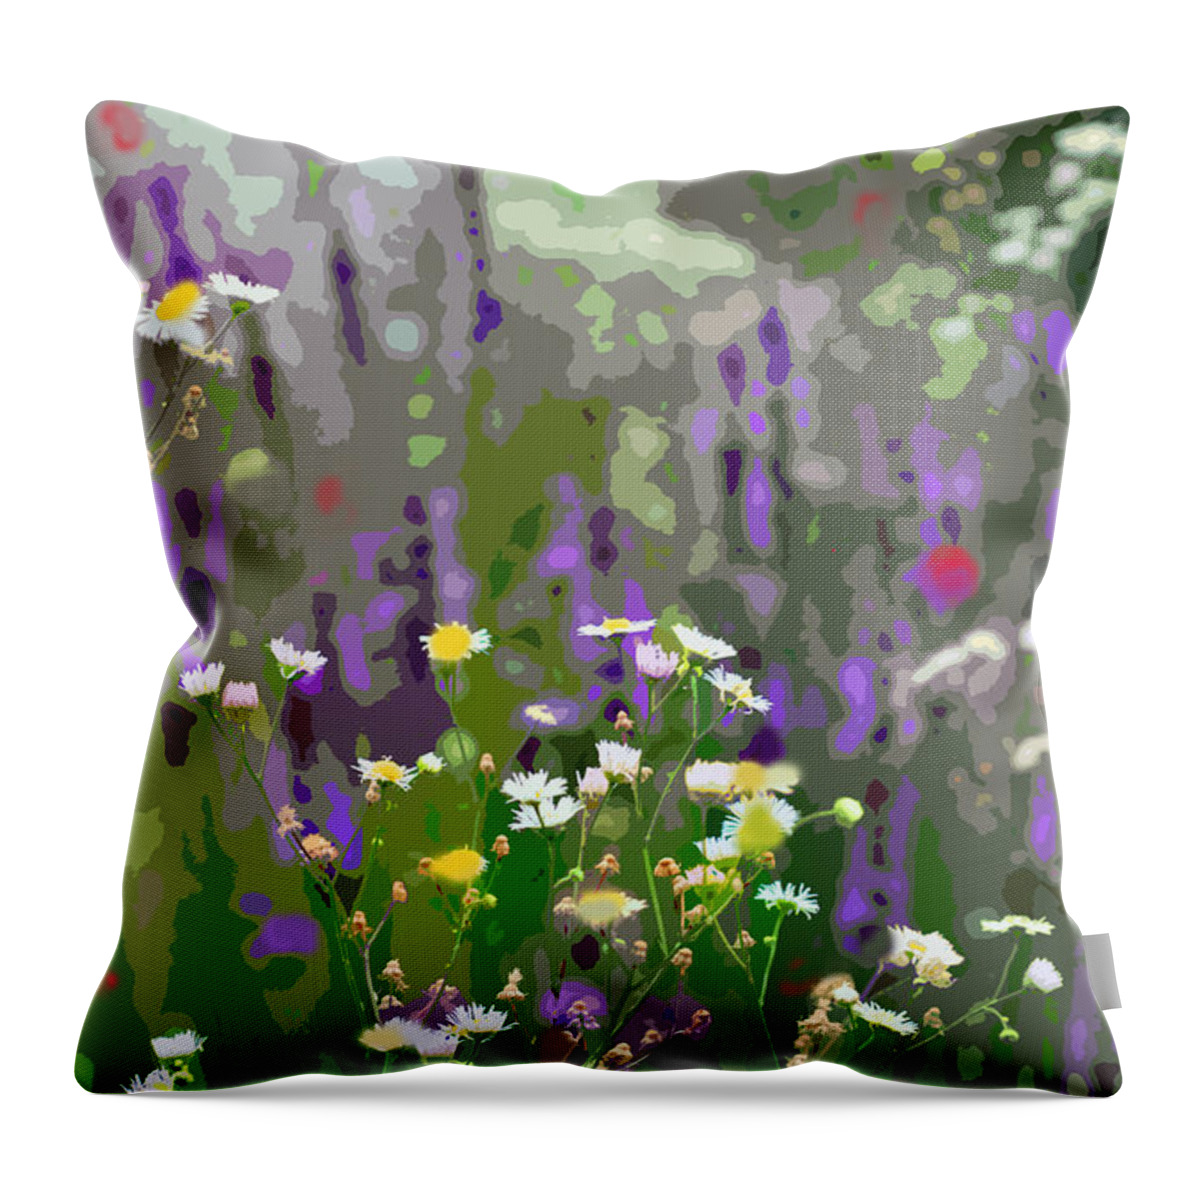 Wildflowers Throw Pillow featuring the photograph Wildflowers by Jackson Pearson